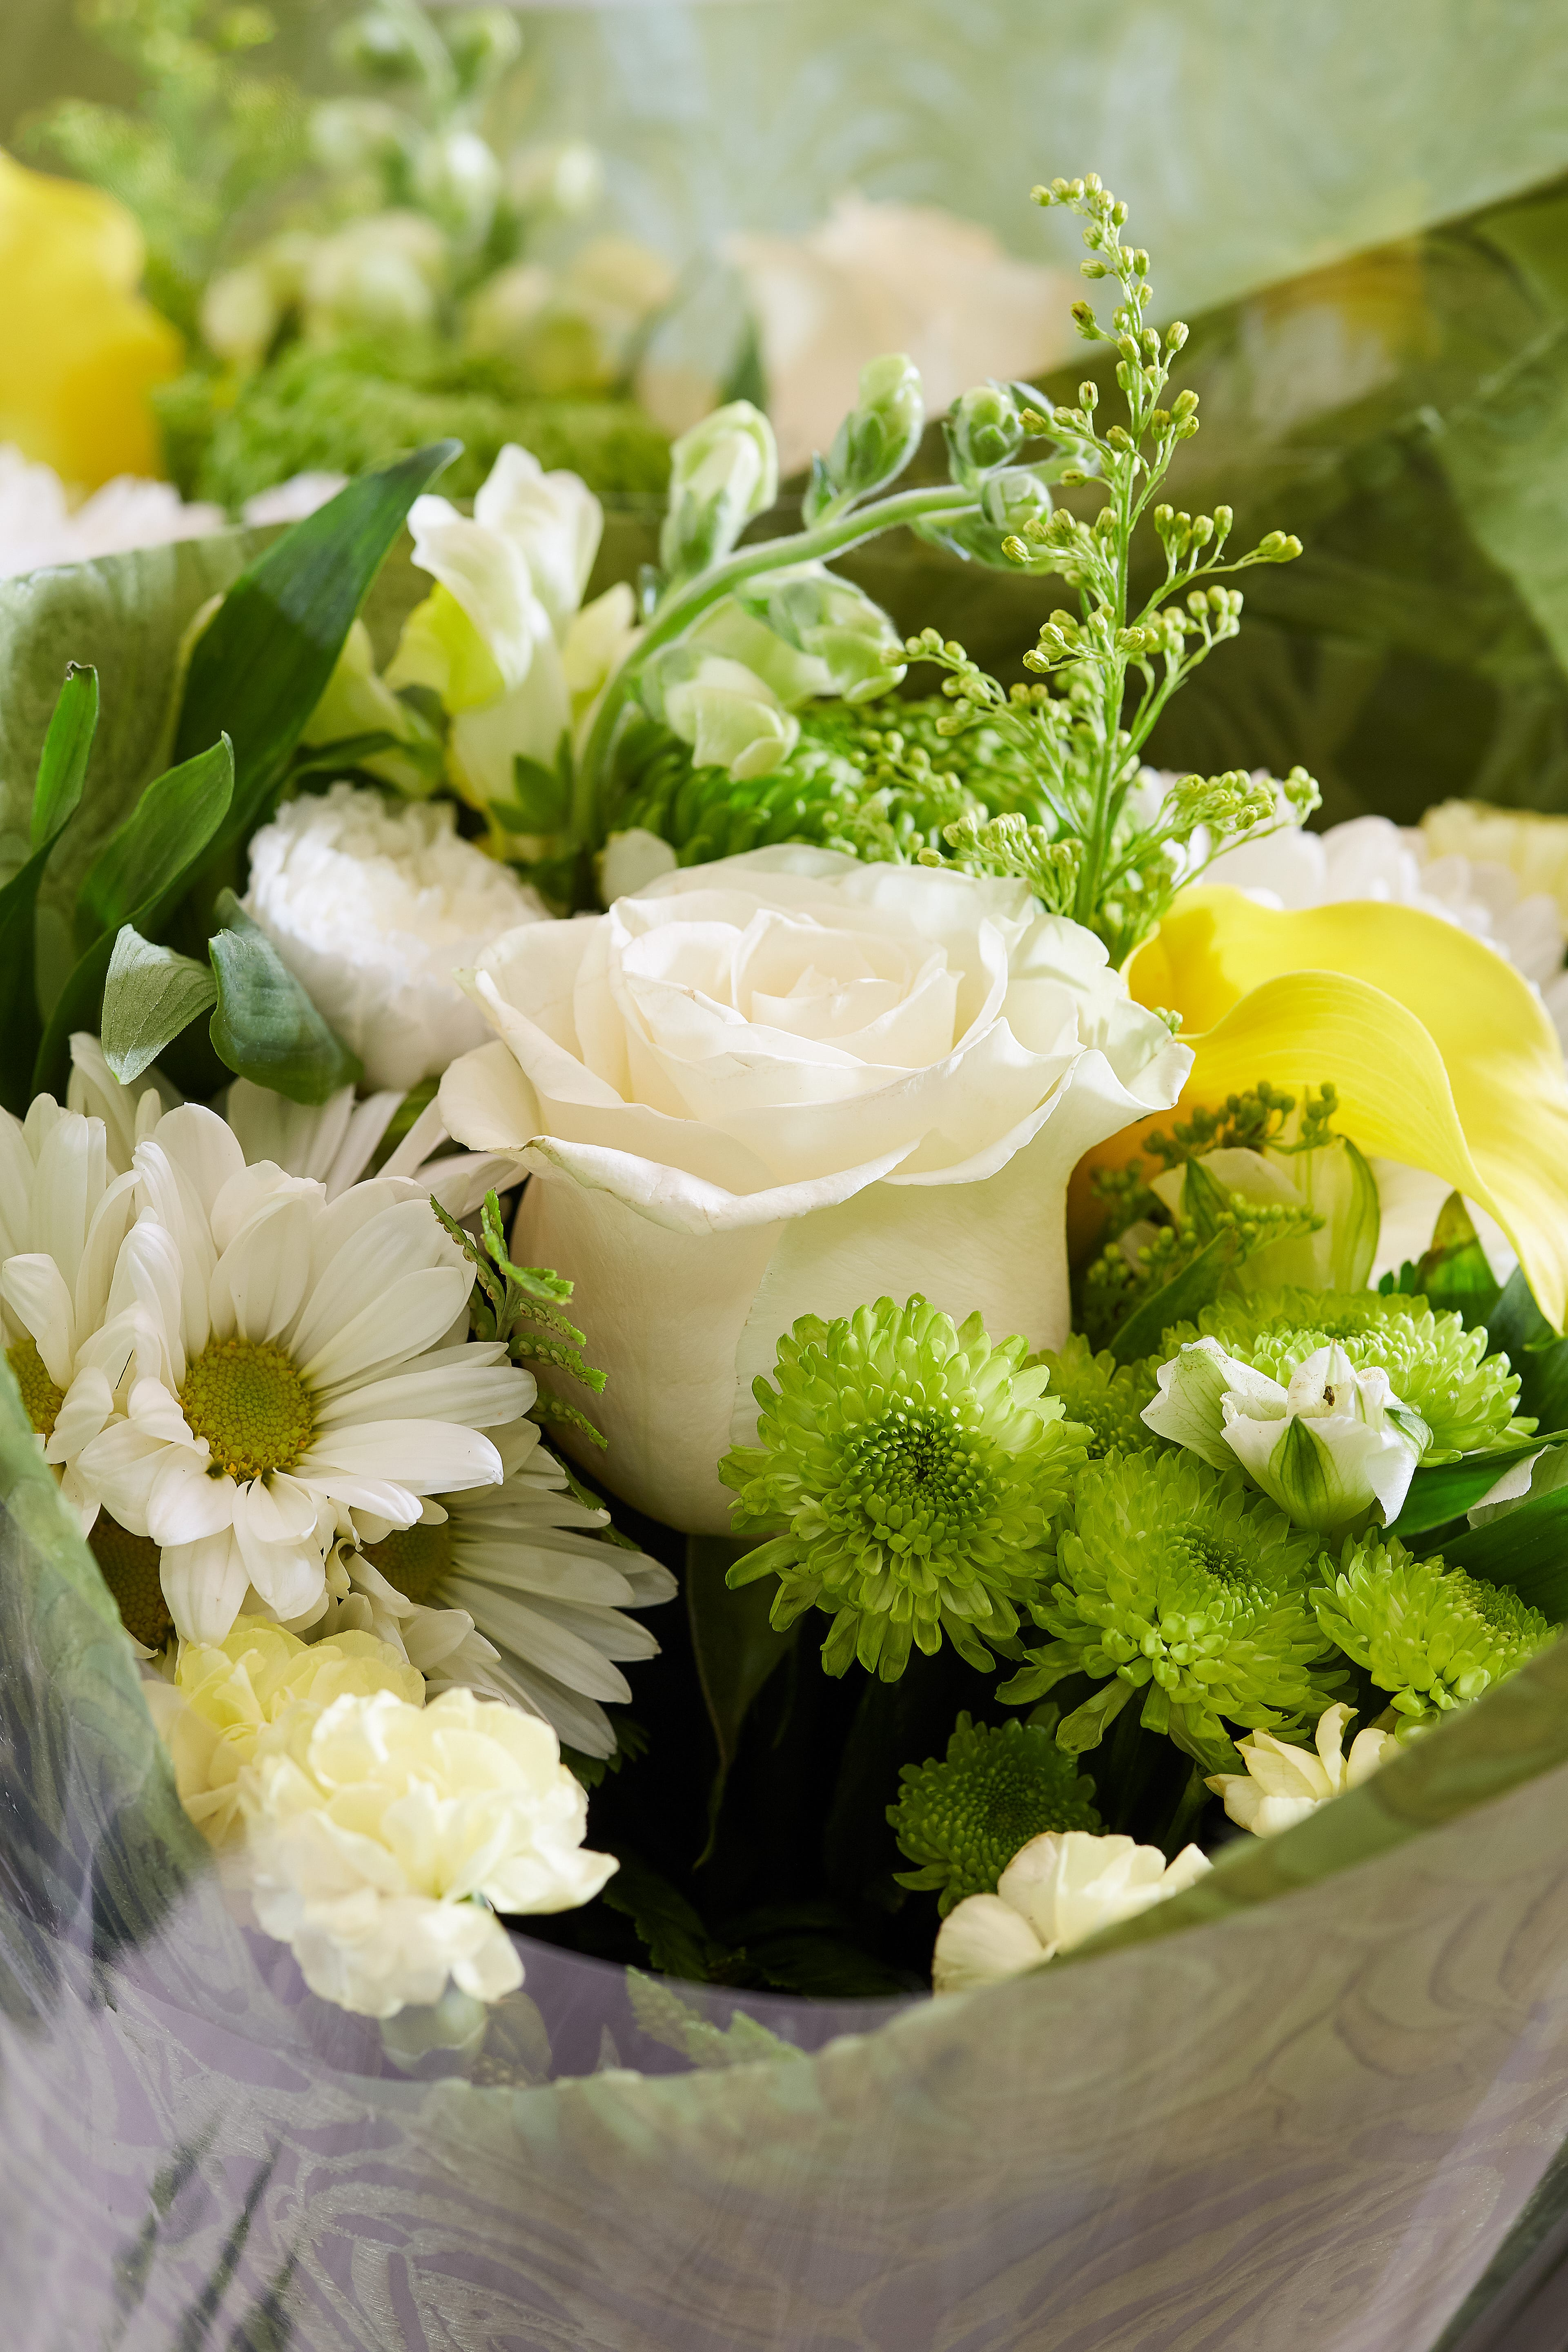 A close up of white roses, daises and greens.